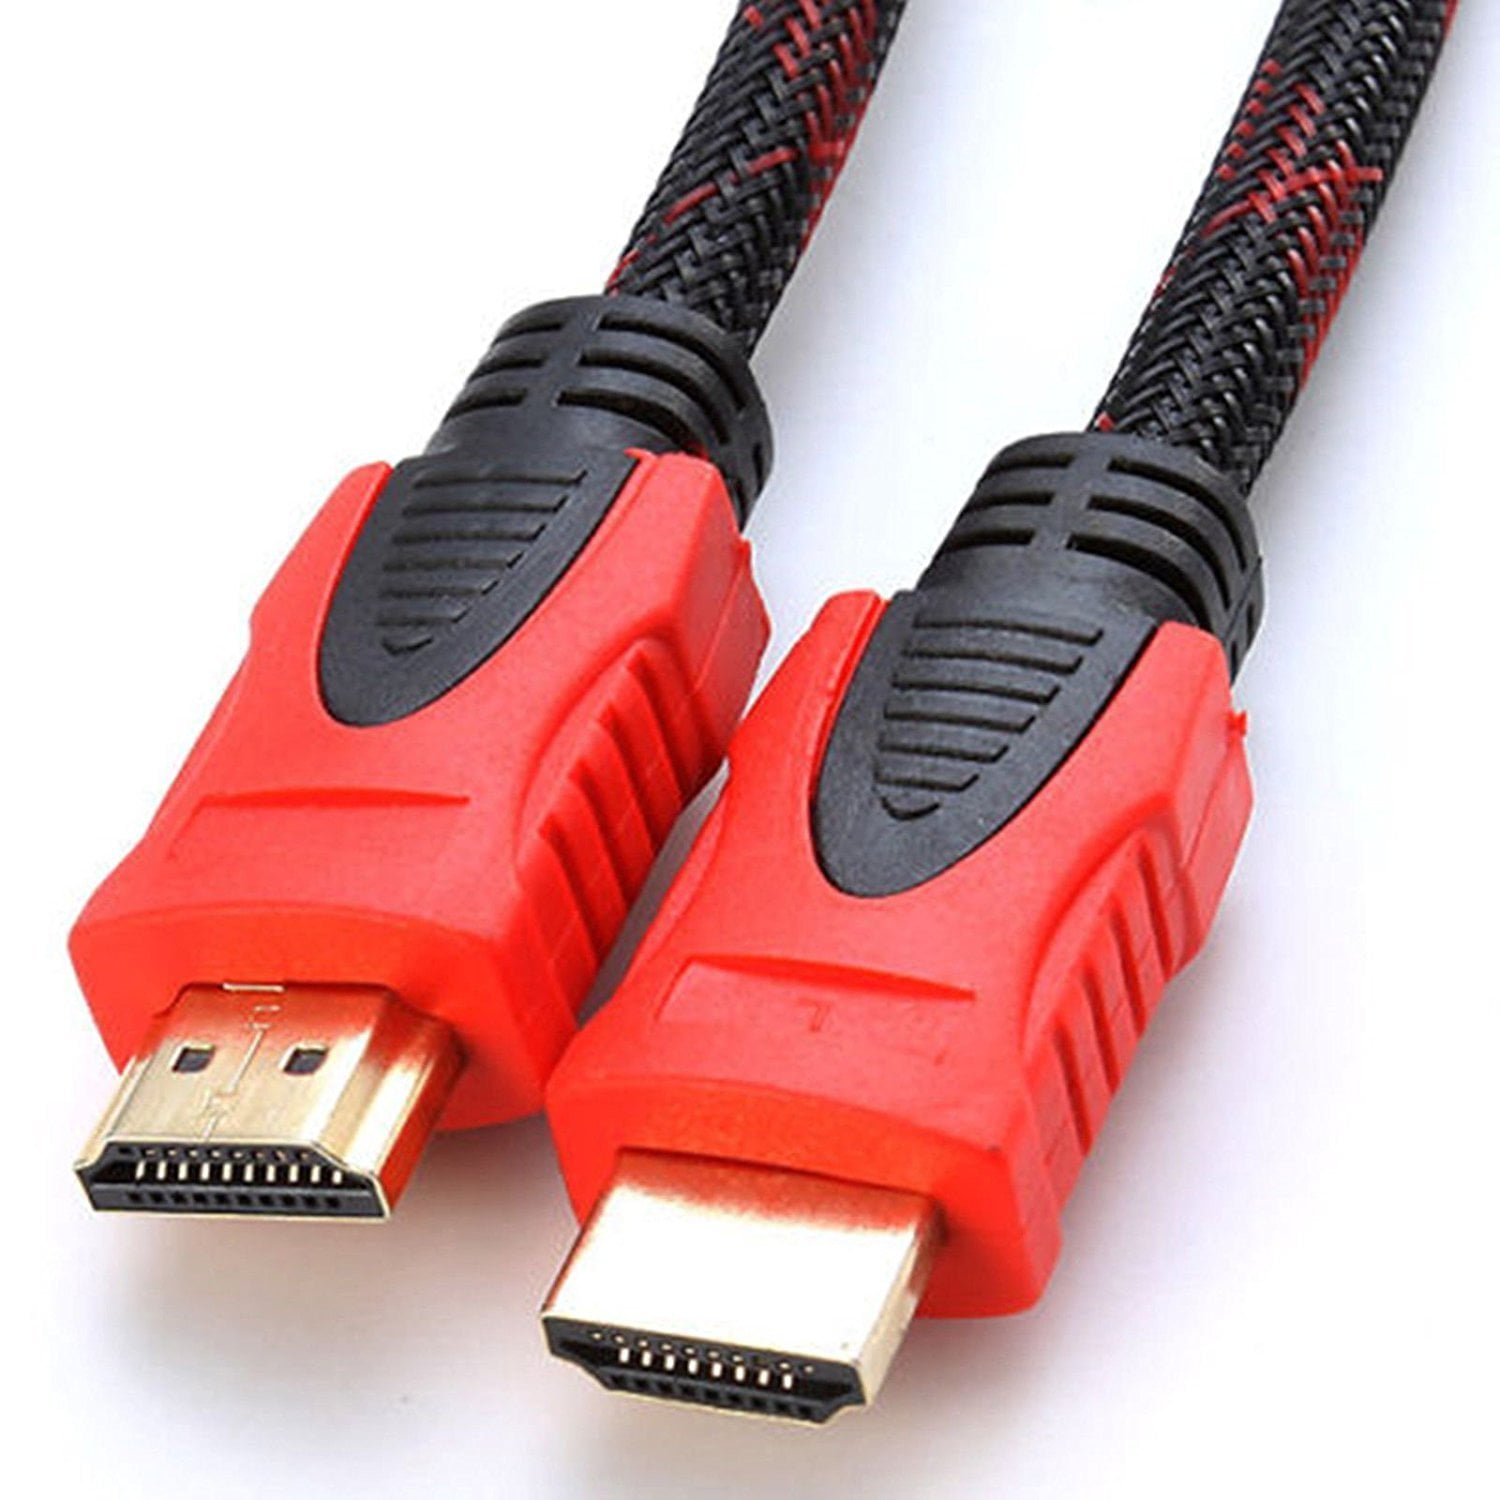 PREMIUM 4K HDMI CABLE 2.0 HIGH SPEED GOLD PLATED BRAIDED LEAD 2160P 3D HDTV UHD 